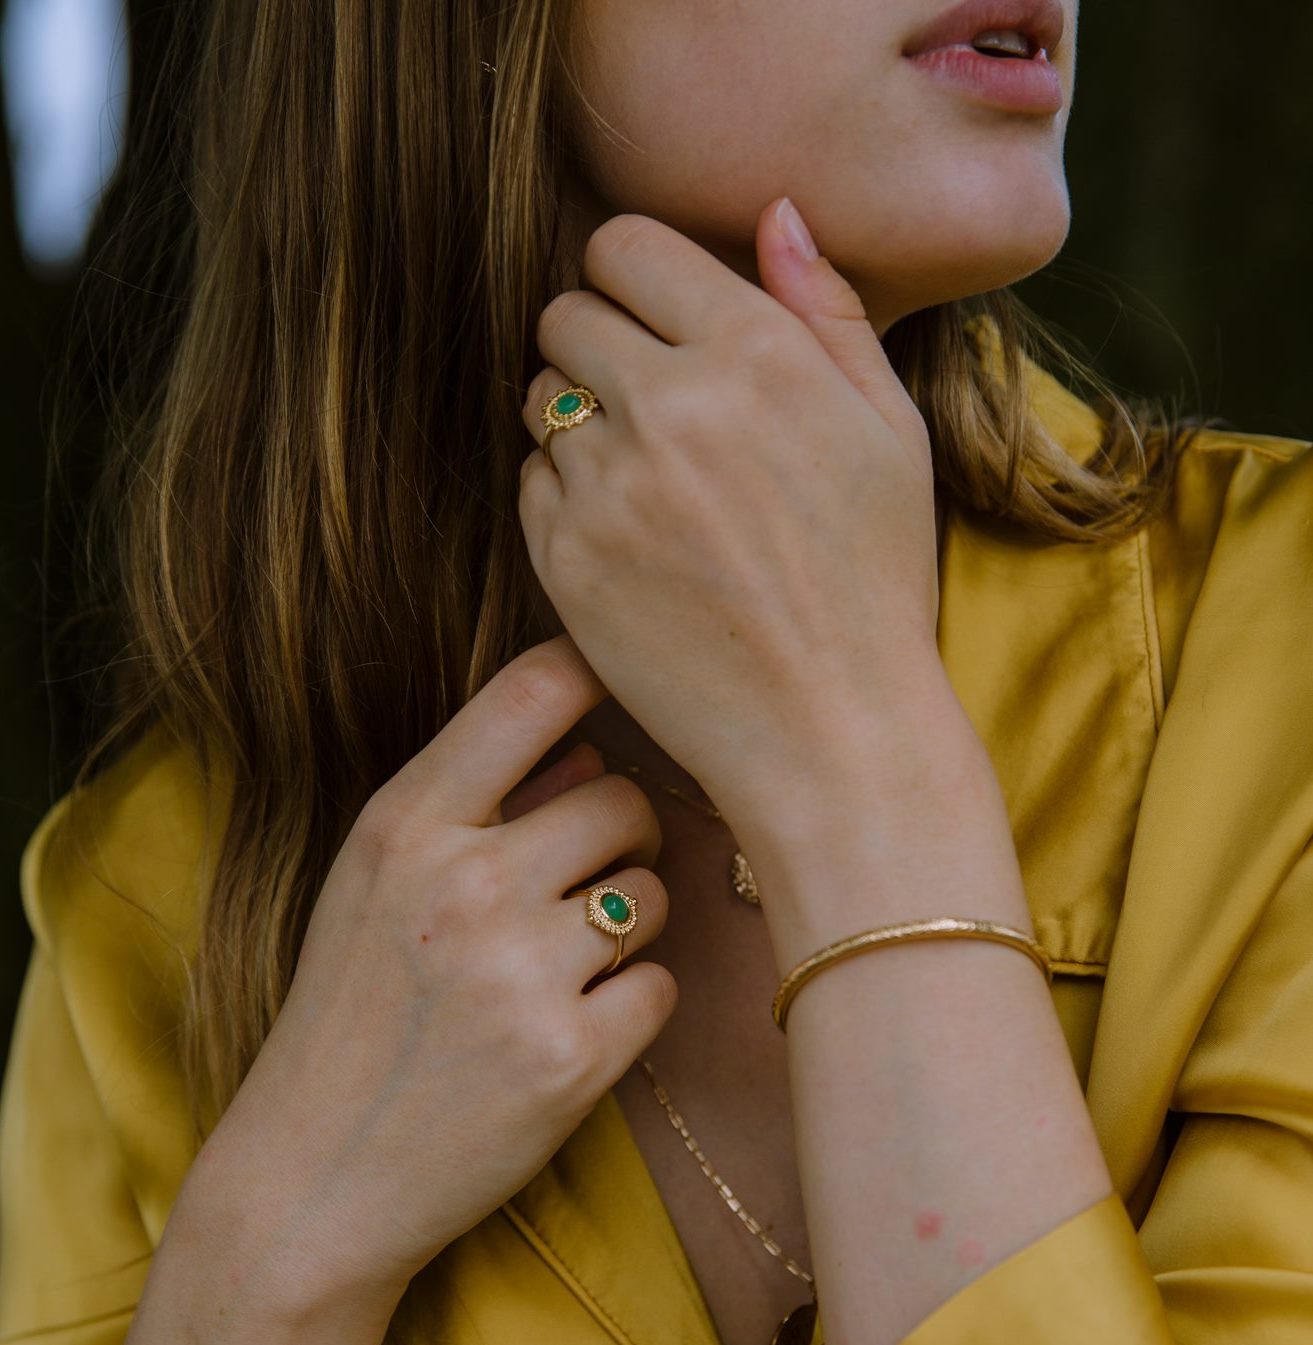 The Solid Gold Ring : Get the best ideas & fashion tips on how to wear it